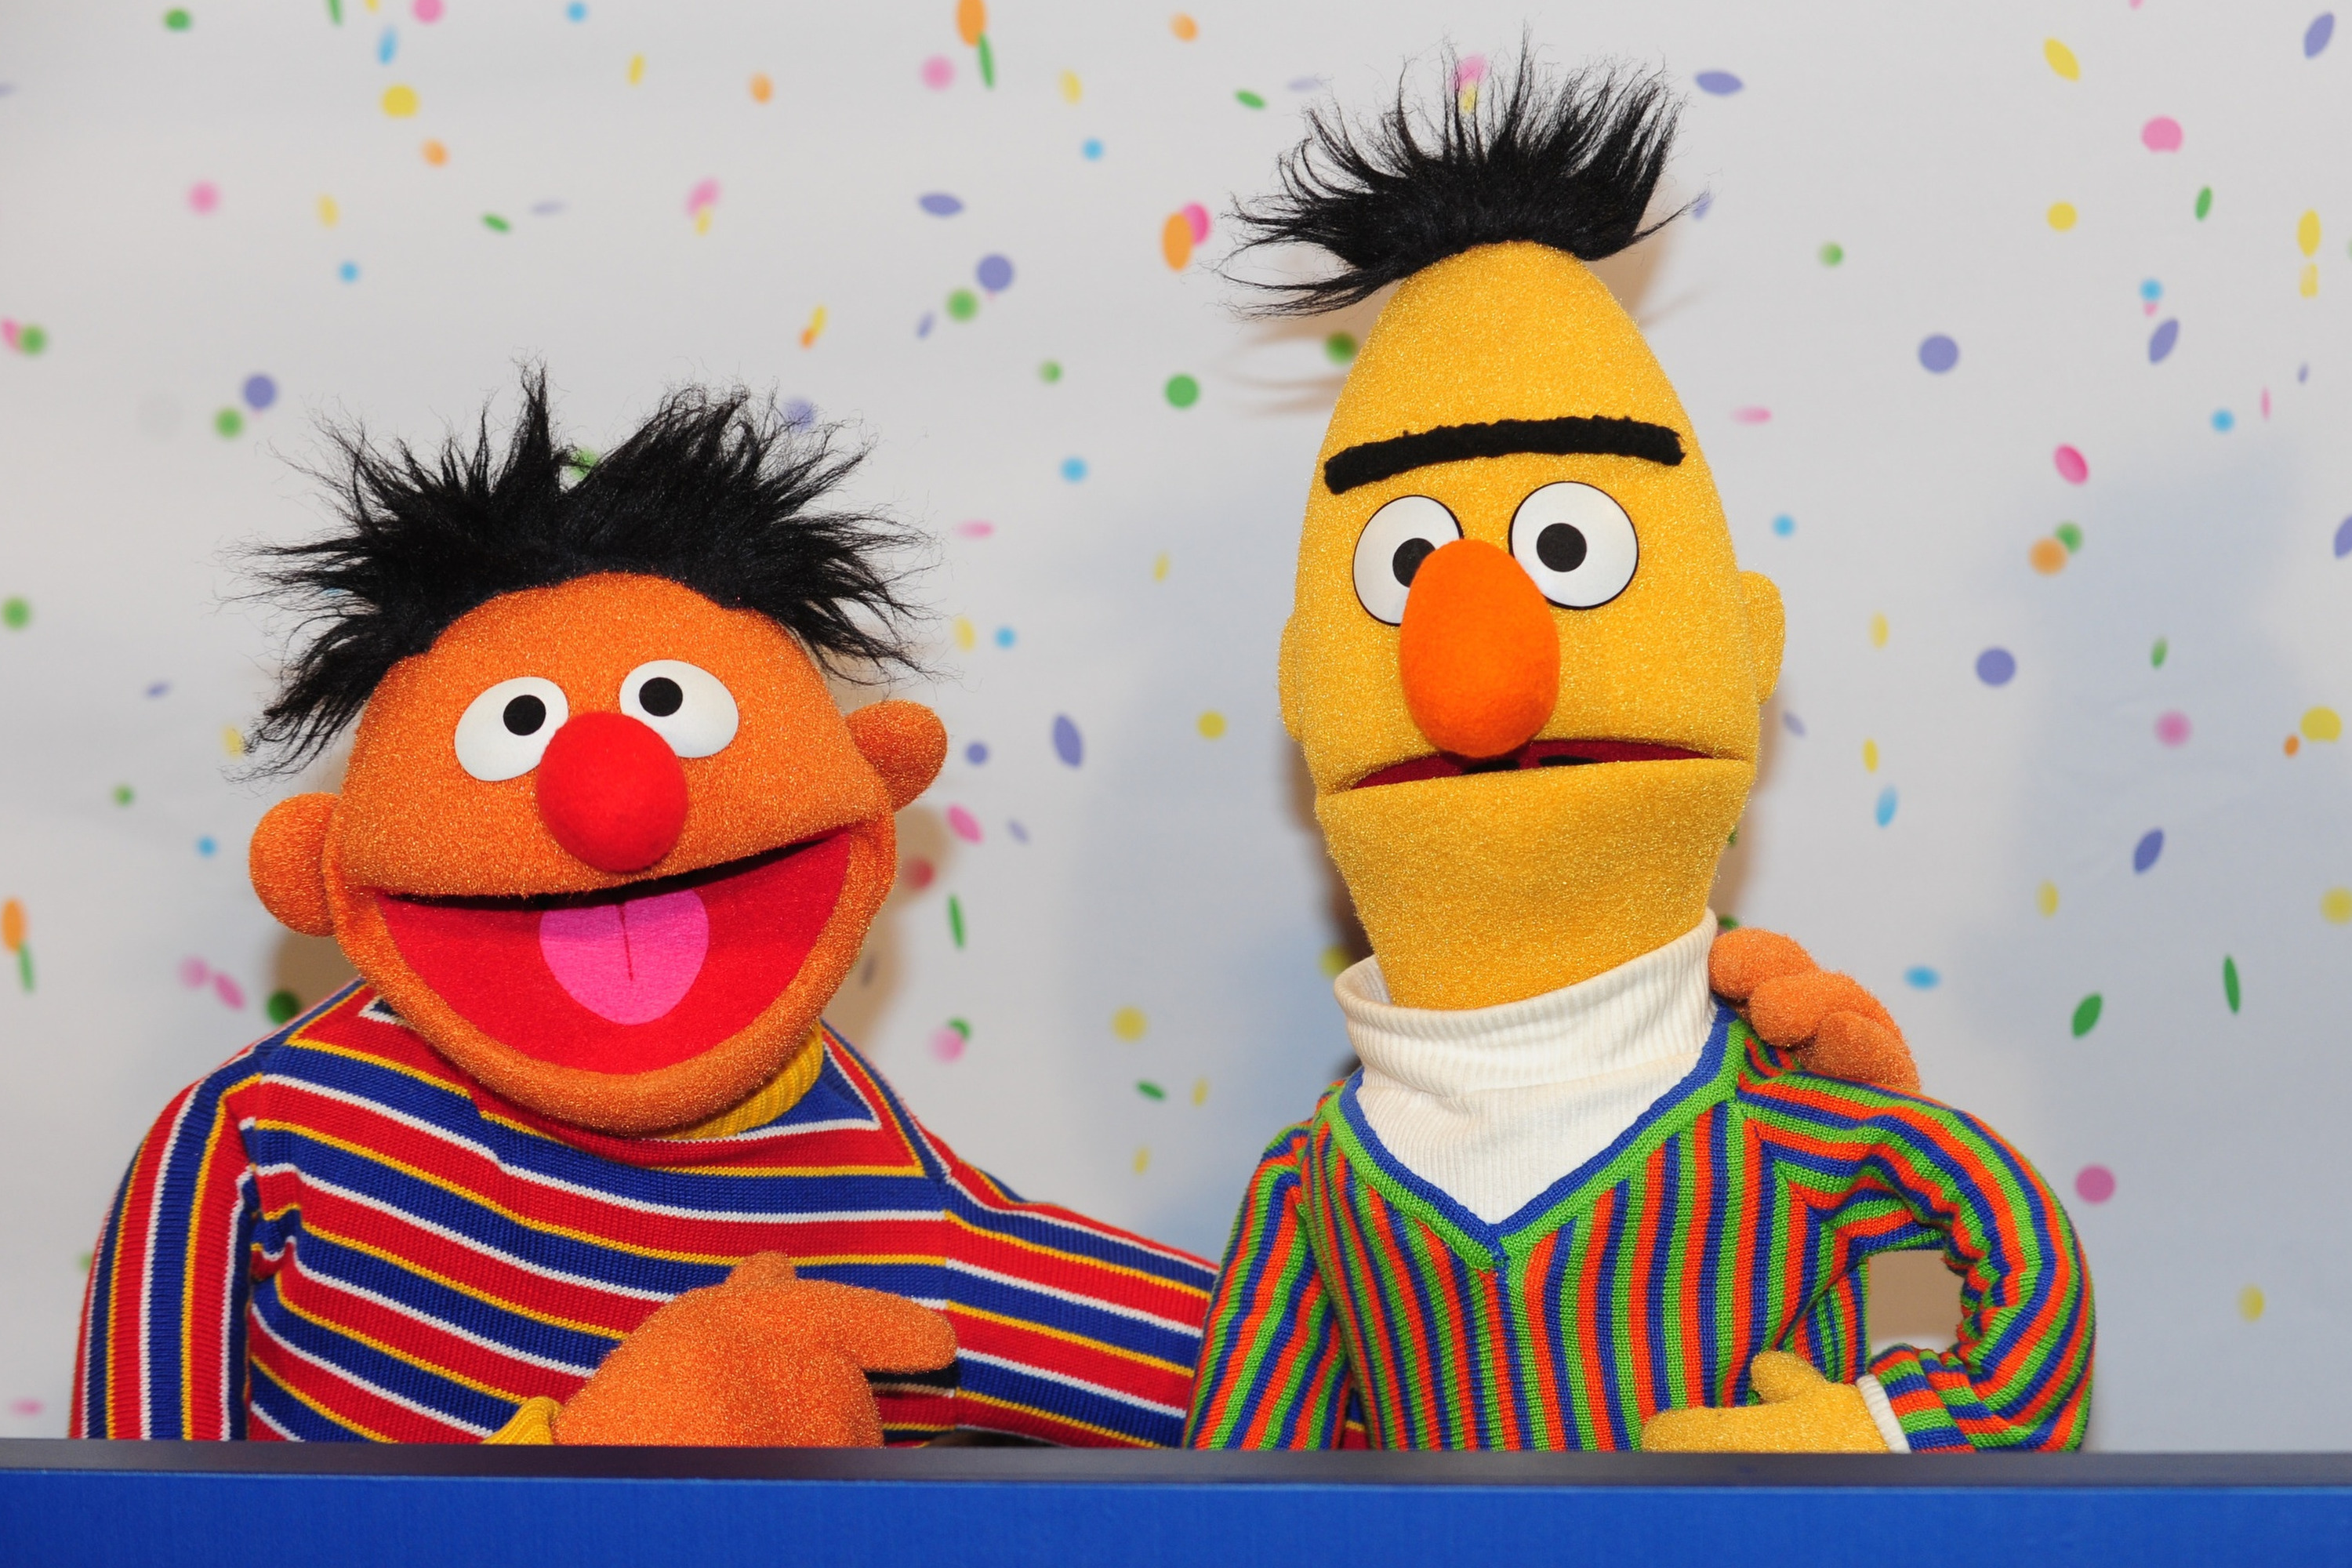 Bert and Ernie revealed to be a gay couple by former Sesame Street writer Mark Saltzman